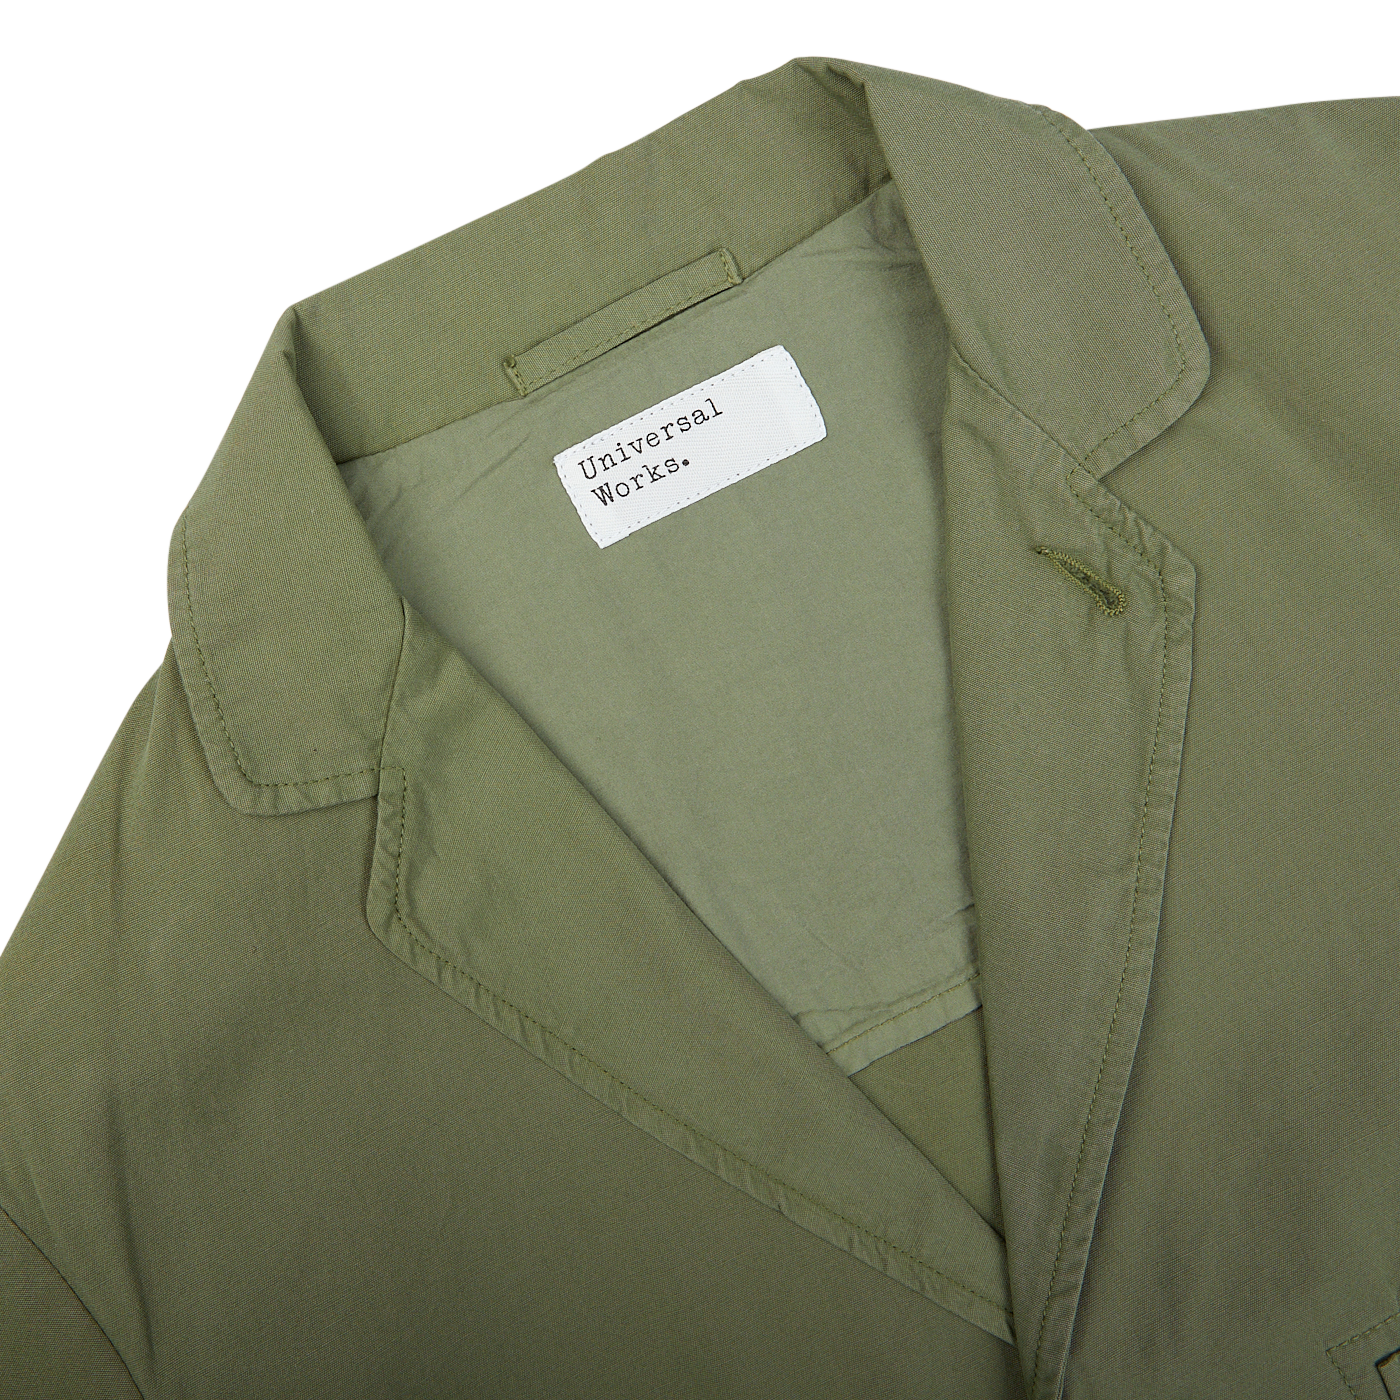 Birch Green Cotton Summer Canvas 5-Pocket Jacket with a label showing the brand "Universal Works".